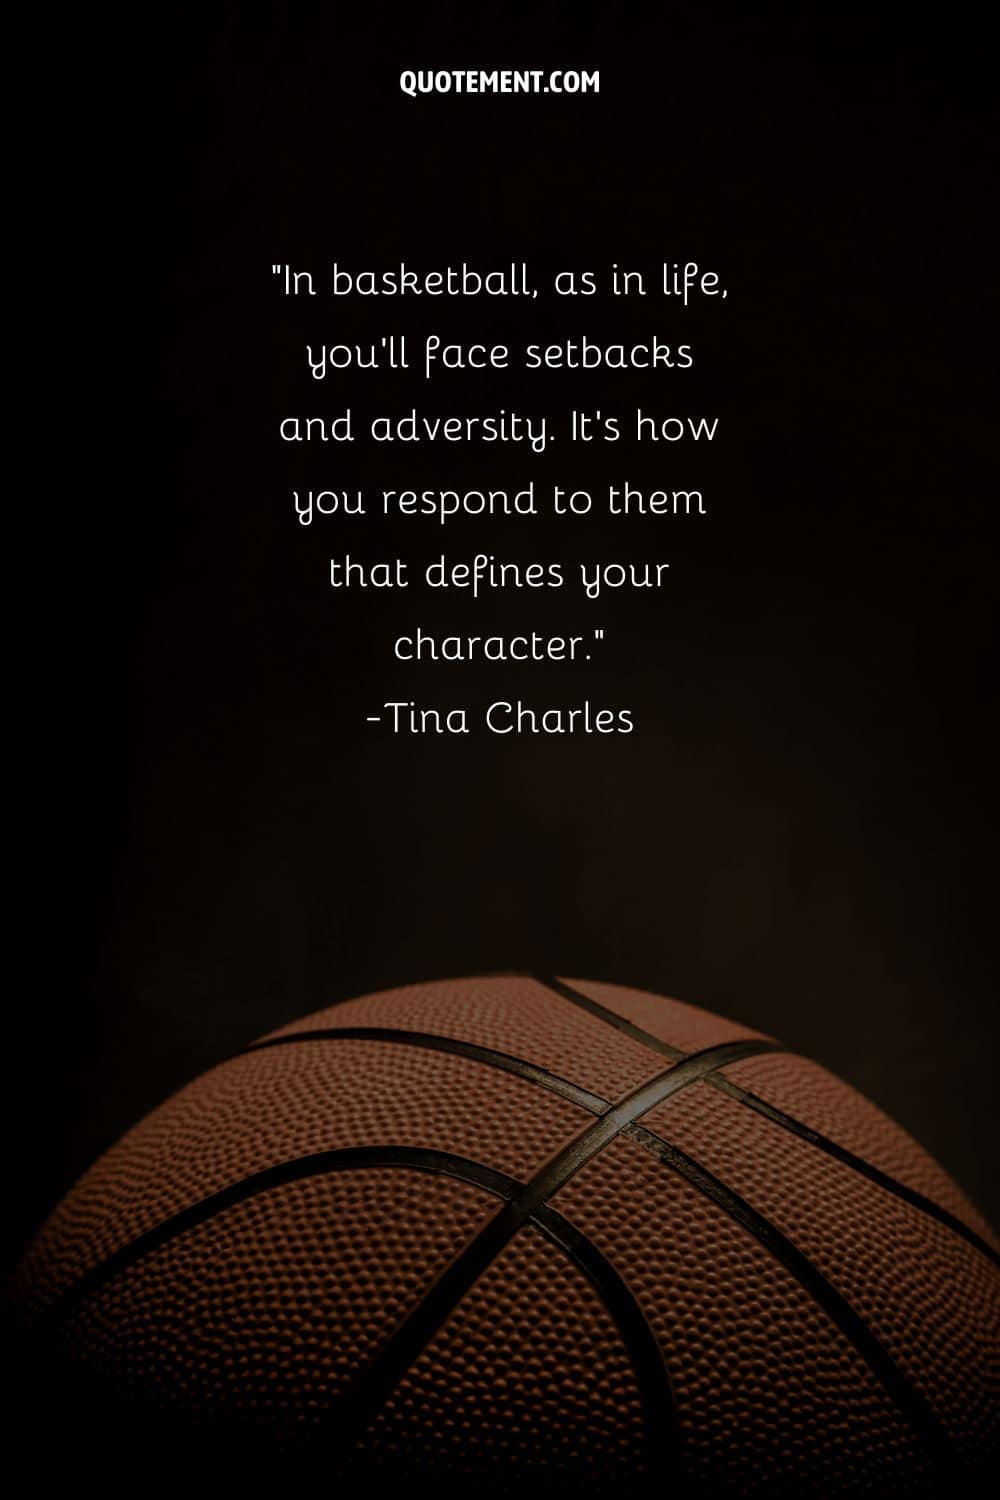 In basketball, as in life, you'll face setbacks and adversity